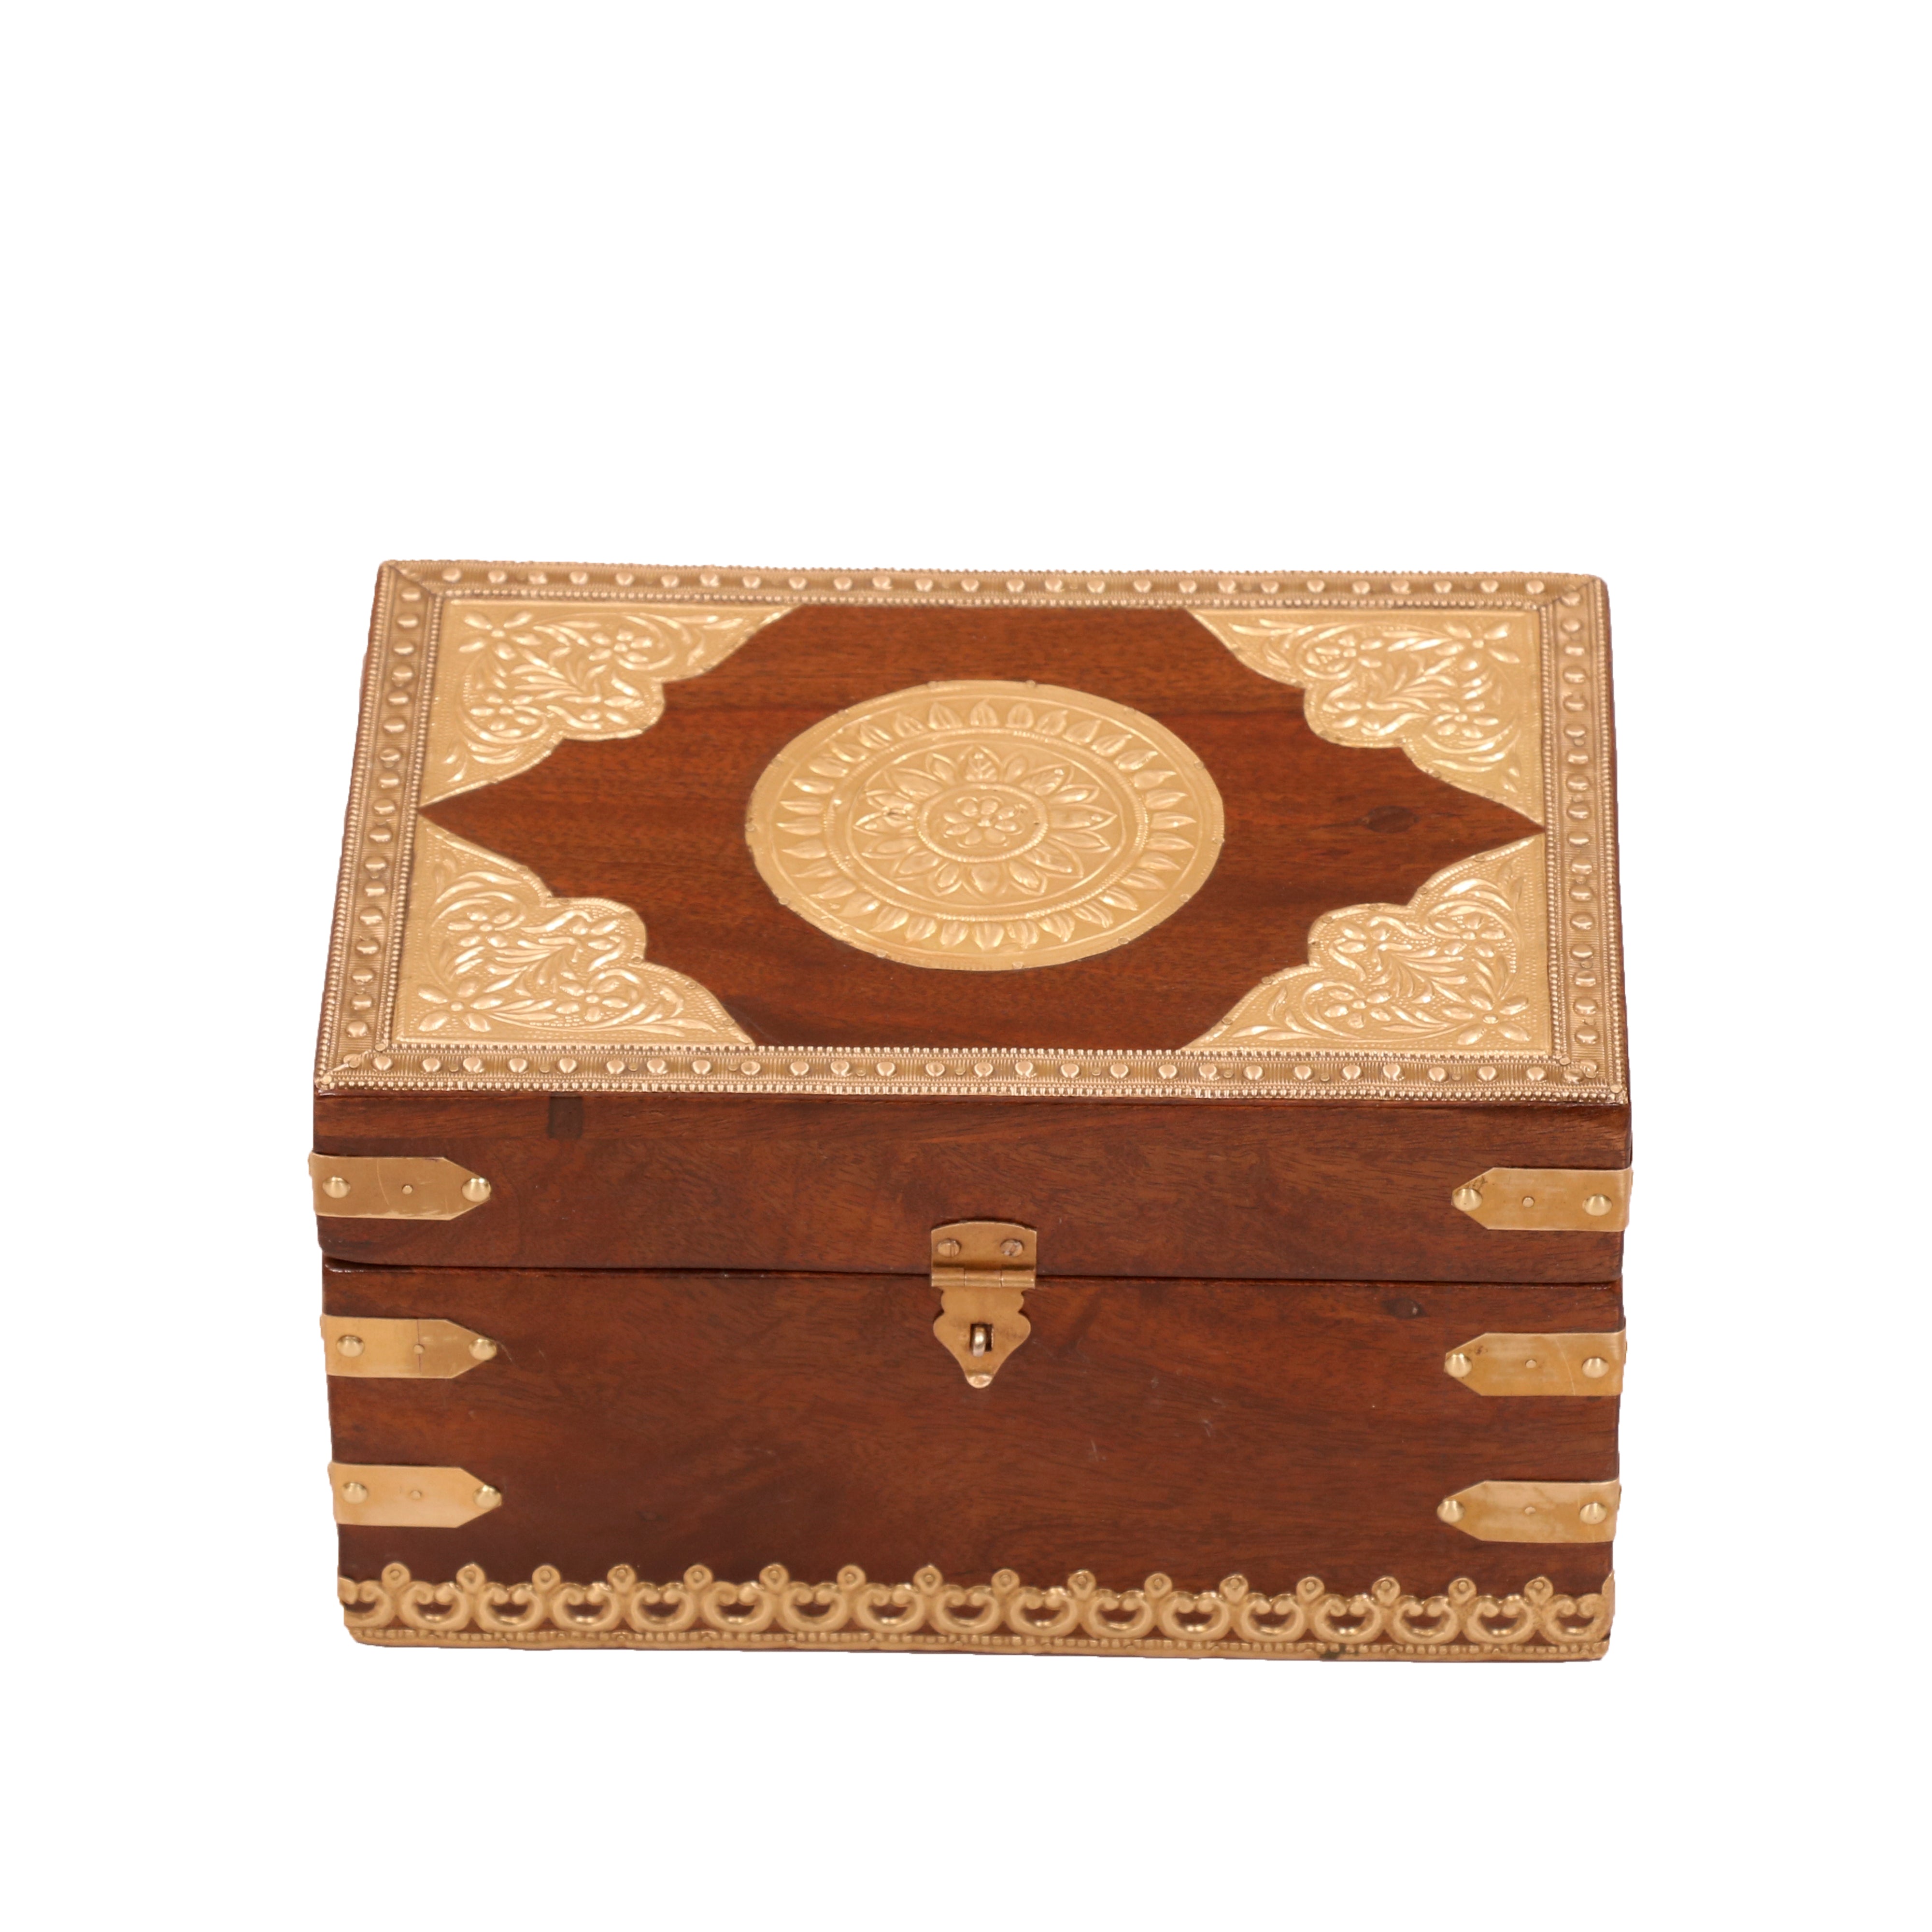 Golden Toned Handmade Brass Fitted Wooden Jewelry Box for Home Wooden Box